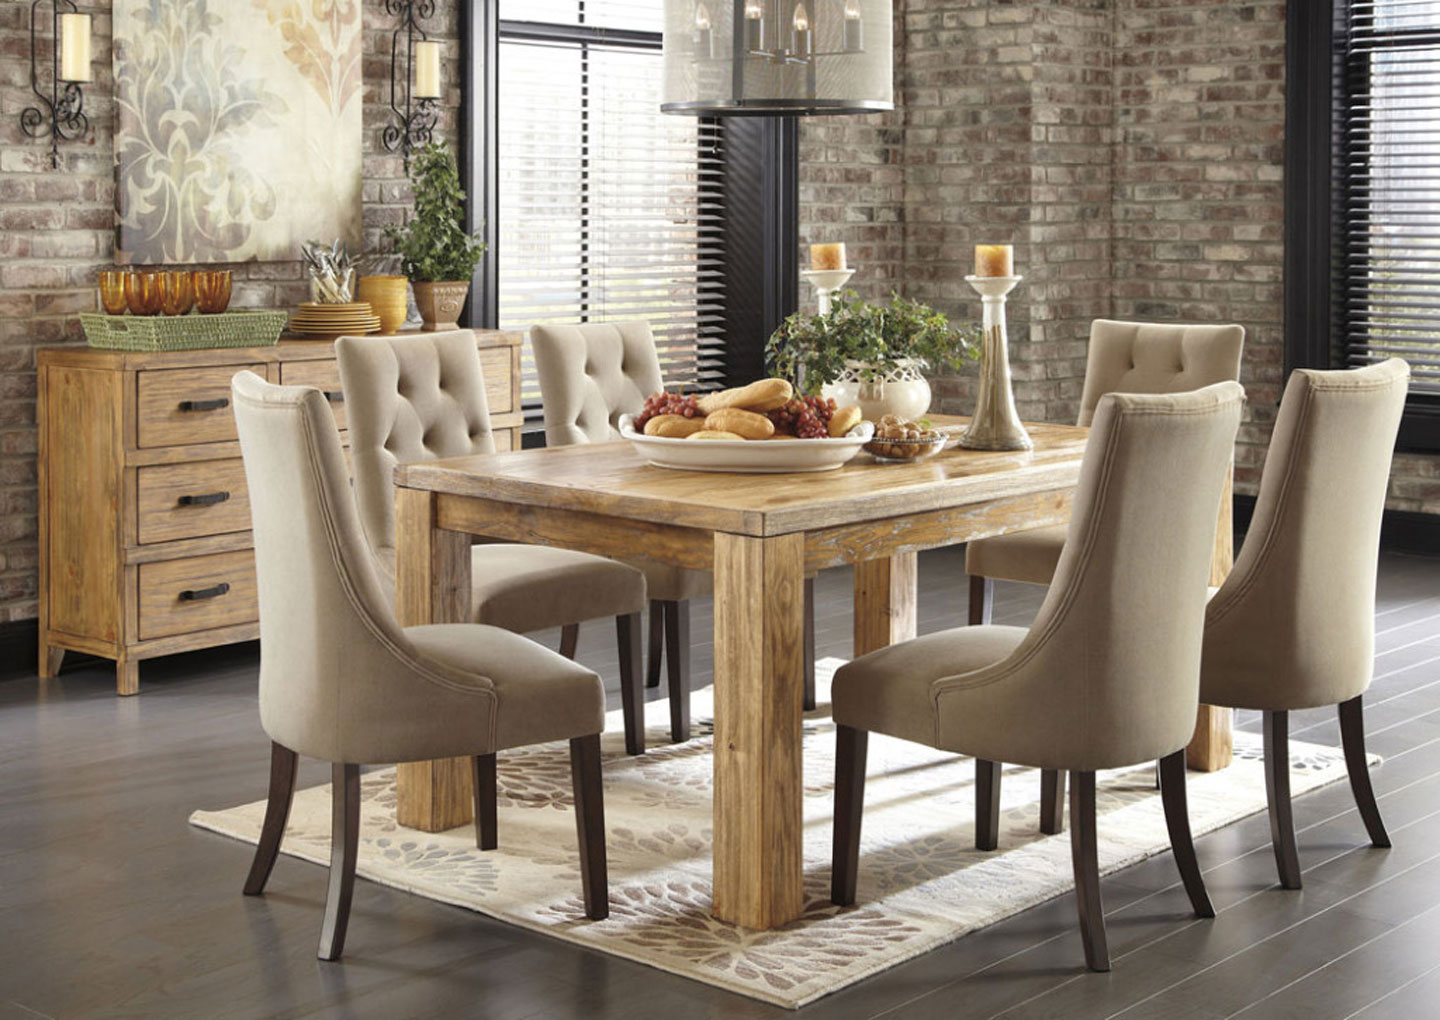 Dining Room Upholstered Splendid Dining Room Furniture With Upholstered Chairs Design Ideas And Rustic Expanding Dining Room Tables Hutch Design Also Cream Colored Thick Carpet Idea Plus Simple Bread Plate Ideas Dining Room Modern Dining Room Furniture Design